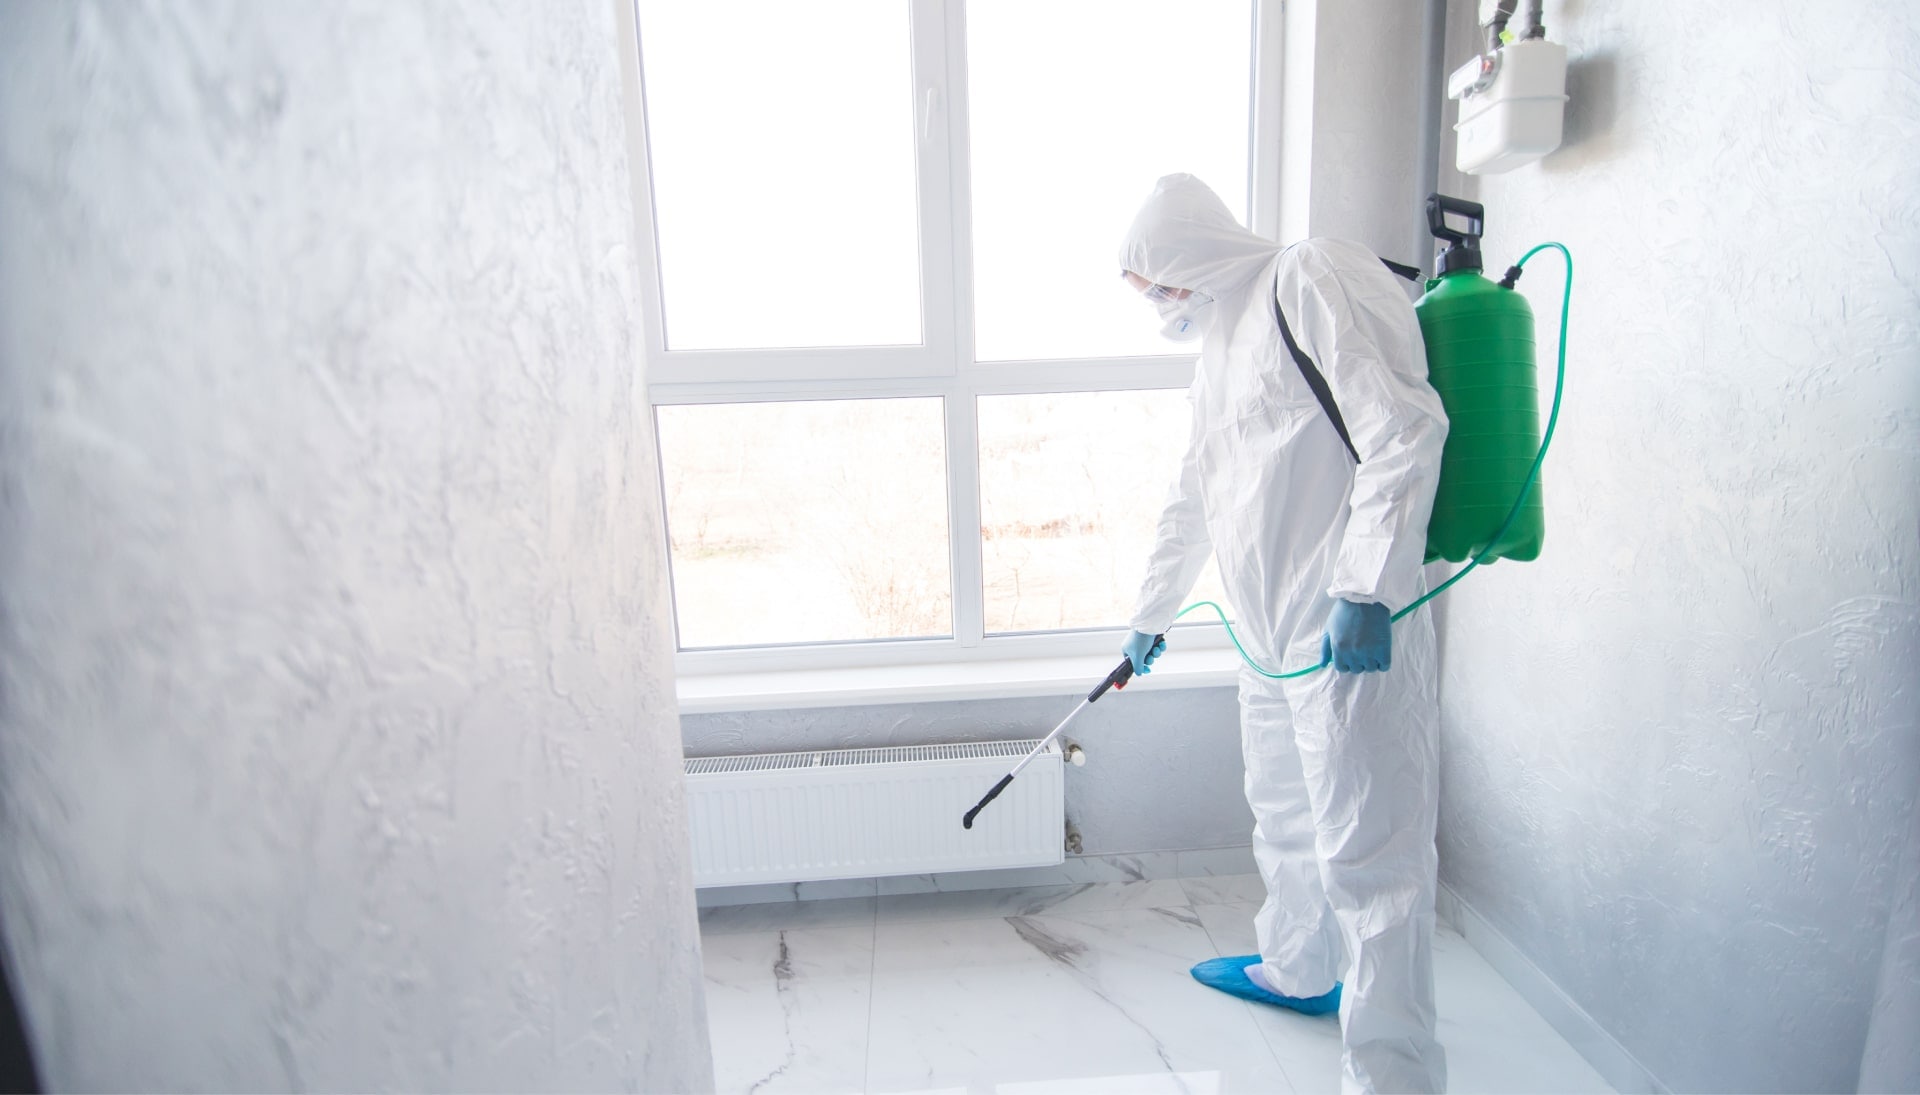 We provide the highest-quality mold inspection, testing, and removal services in the Cary, North Carolina area.